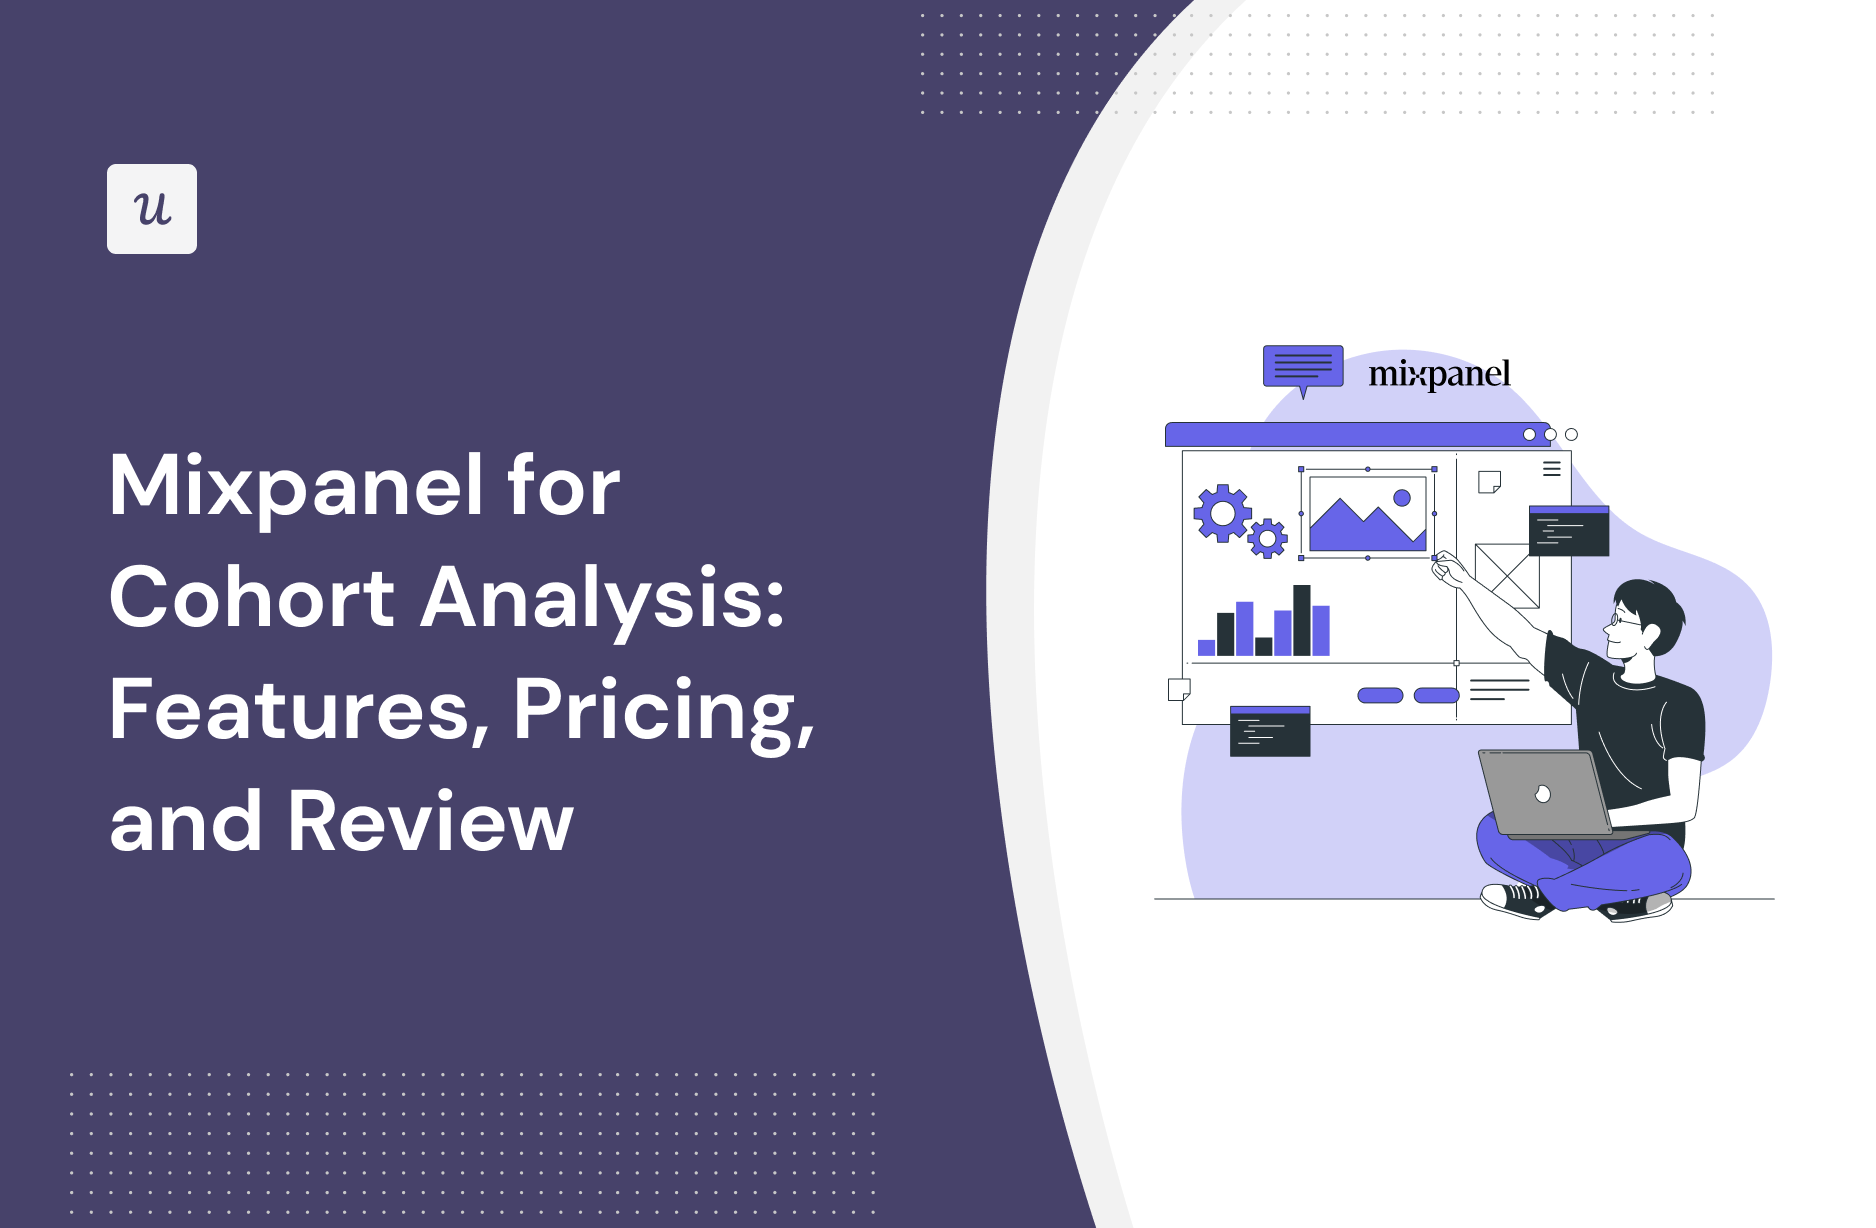 Mixpanel for Cohort Analysis: Features, Pricing, and Review